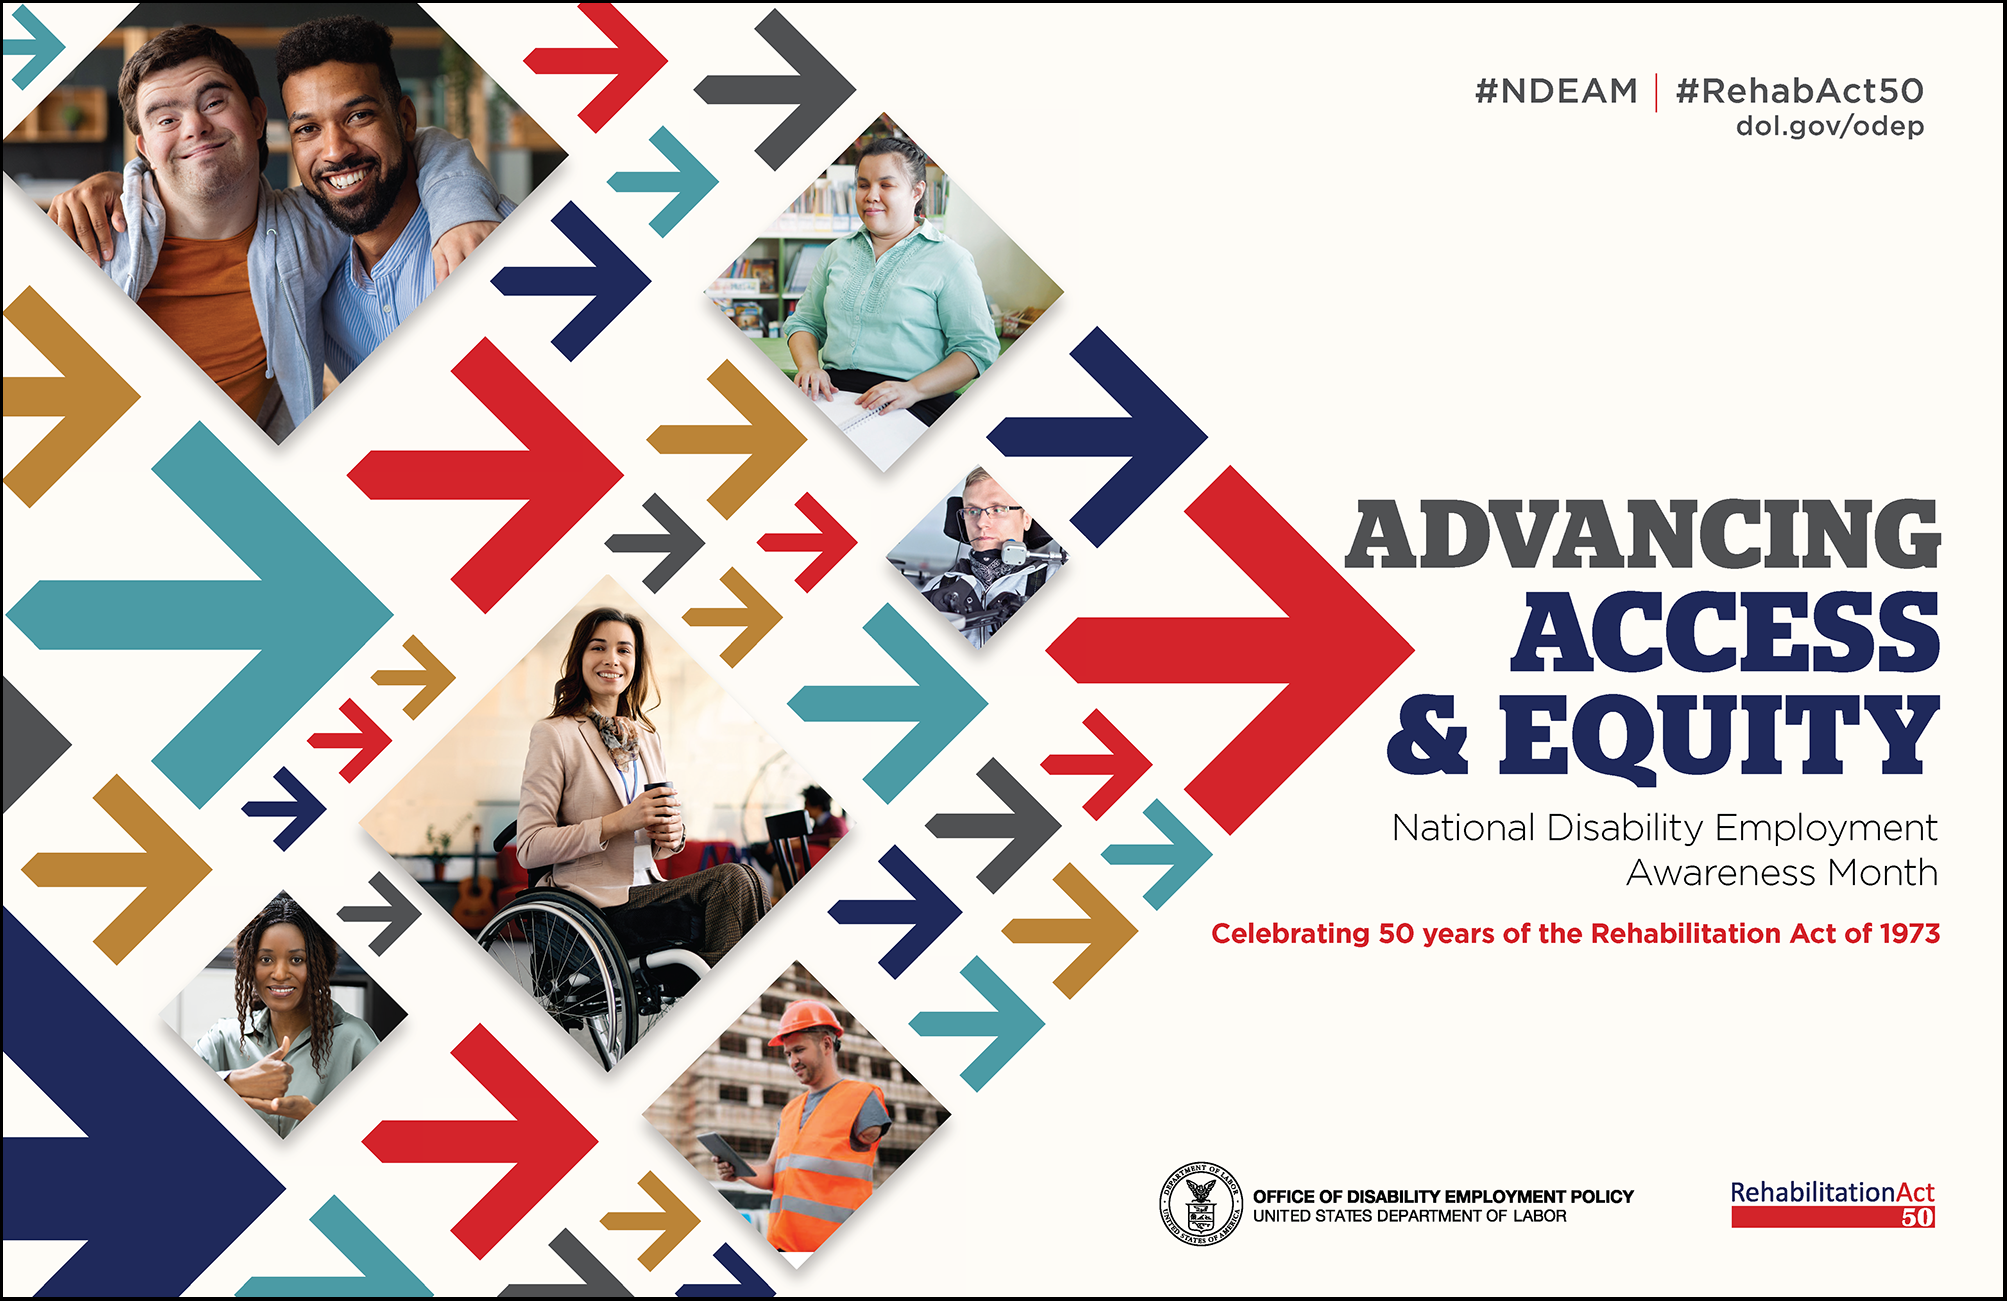 Department of Labor's NDEAM poster. The words, “Advancing Access & Equity, National Disability Employment Awareness Month, Celebrating 50 years of the Rehabilitation Act of 1973” are placed to the right of a field of red, gray, teal, blue and yellow arrows. Mixed within the arrows are diverse images of people with disabilities in workplace settings.